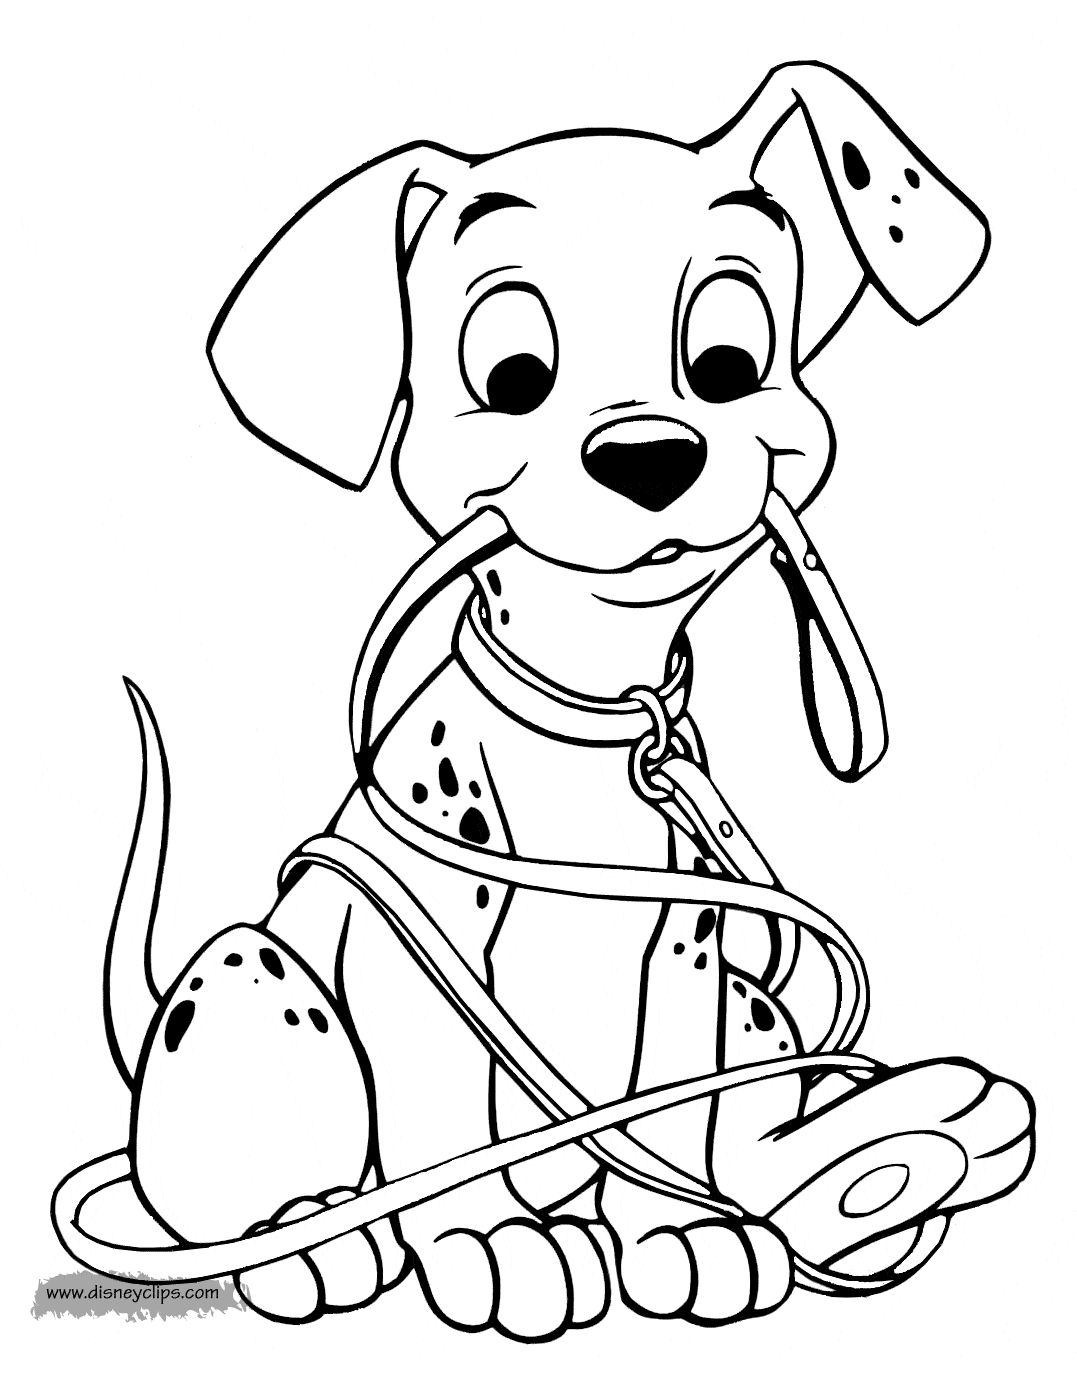 888 Cute Dalmation Coloring Page for Adult